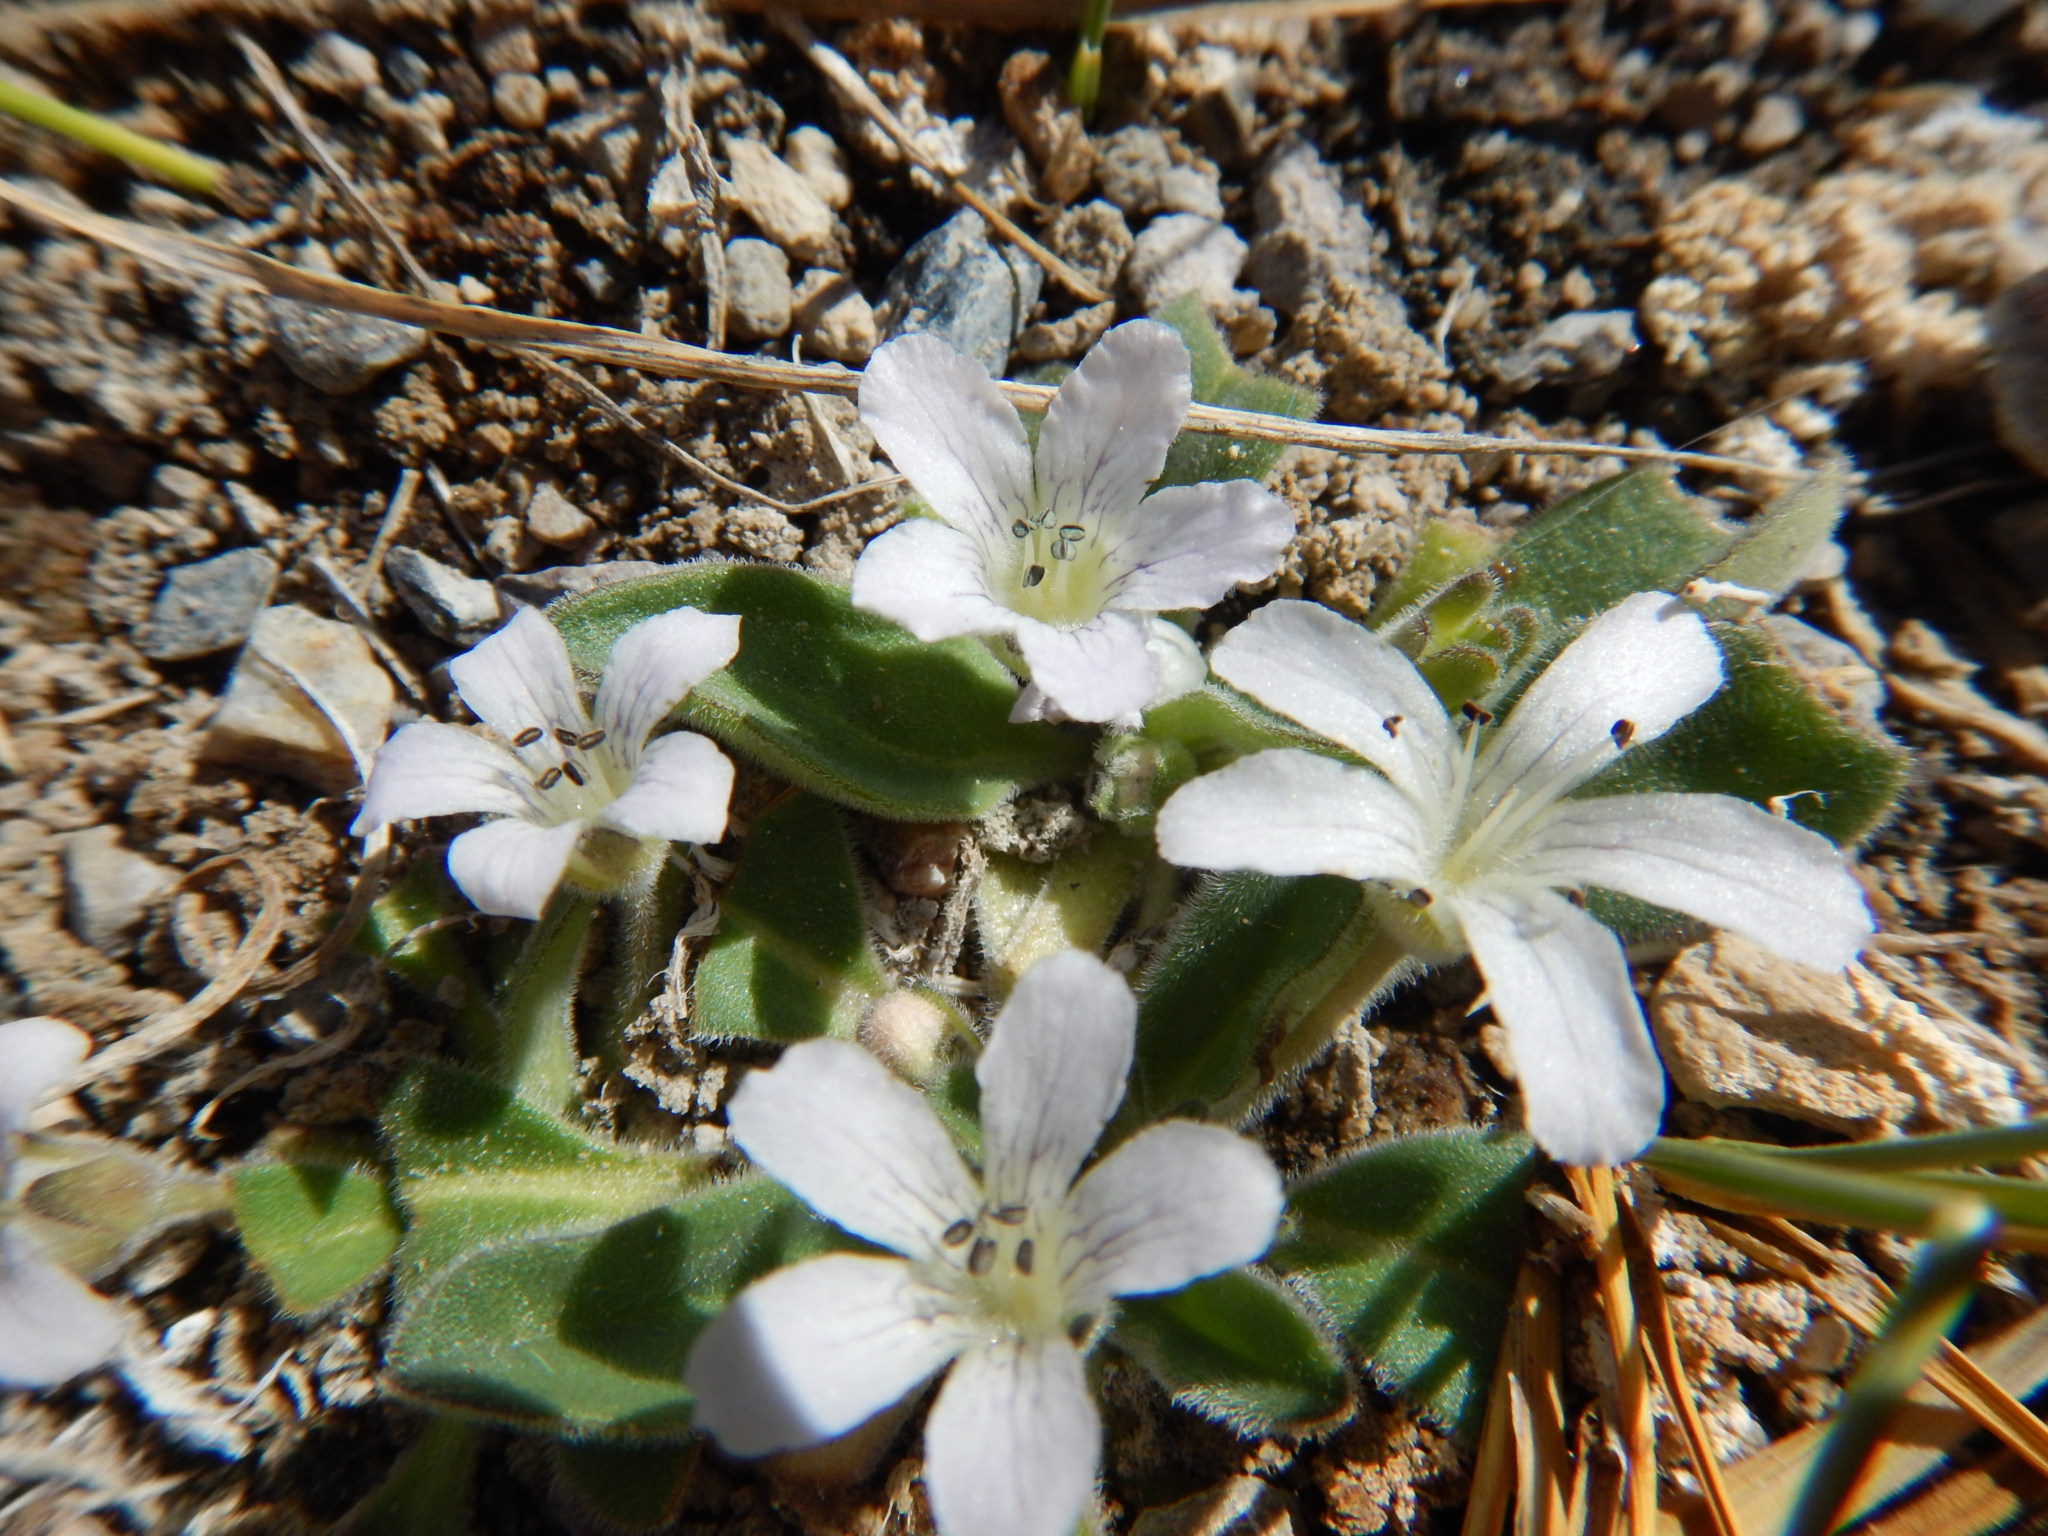 Hesperochiron Californicus, a perennial herb native to California that can be seen blooming at Black Lake this time of year.